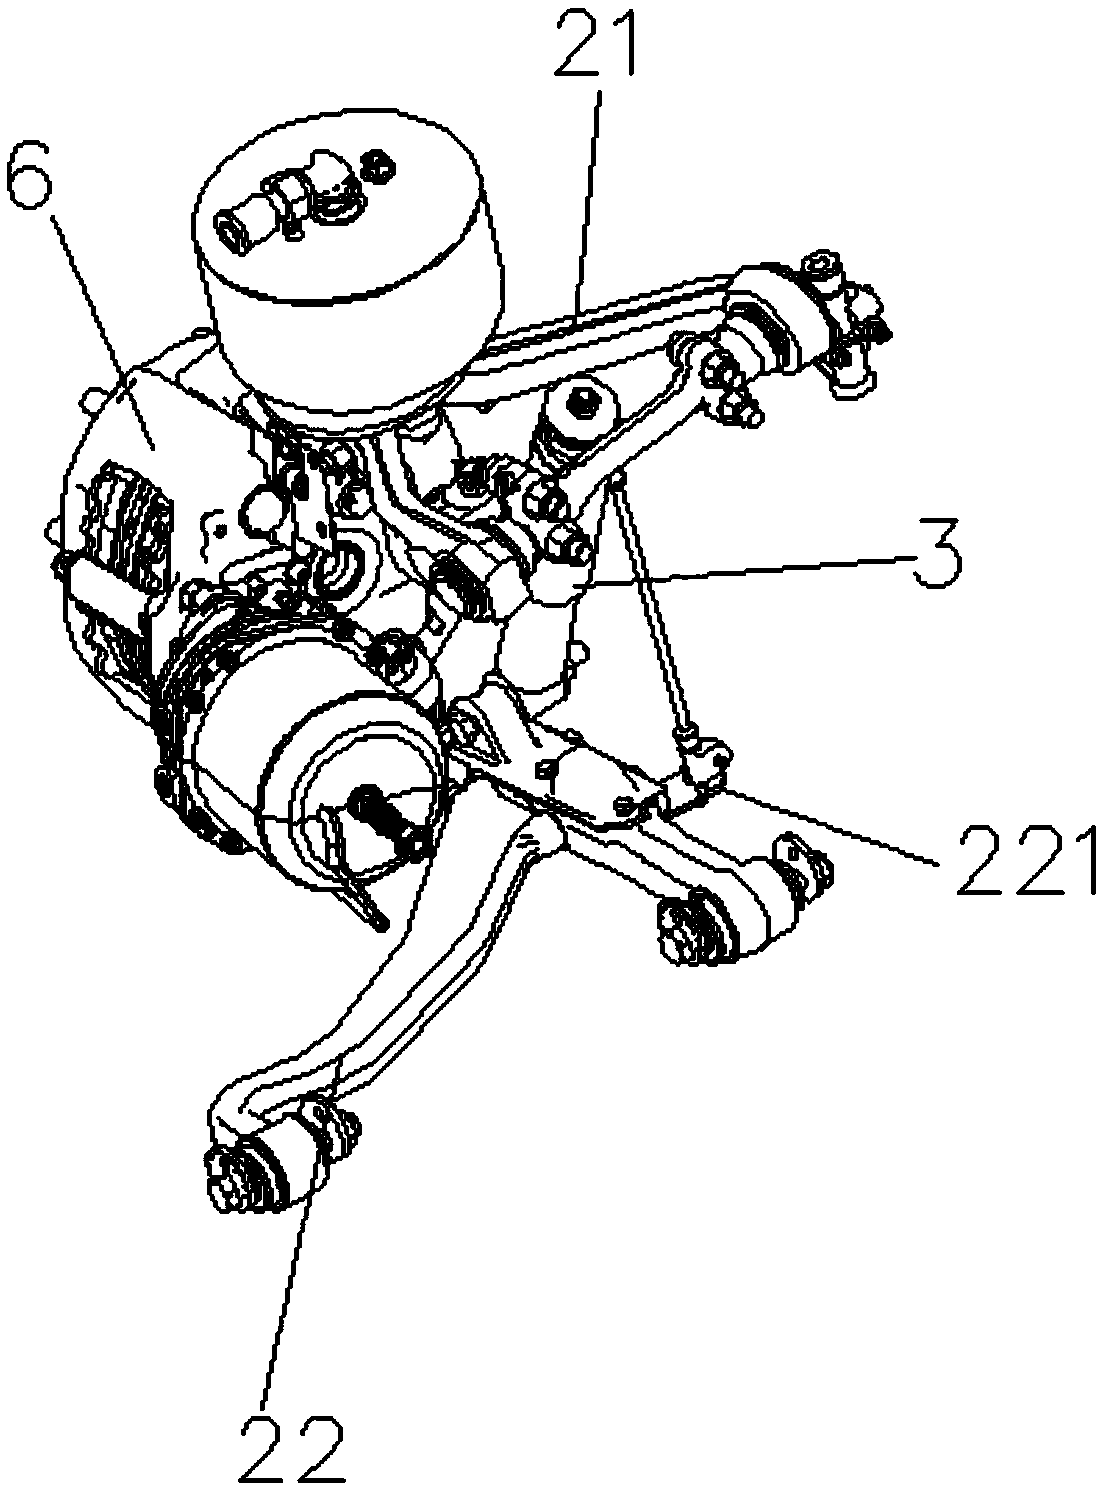 Independent rear suspension of pure electric four-wheel drive passenger car